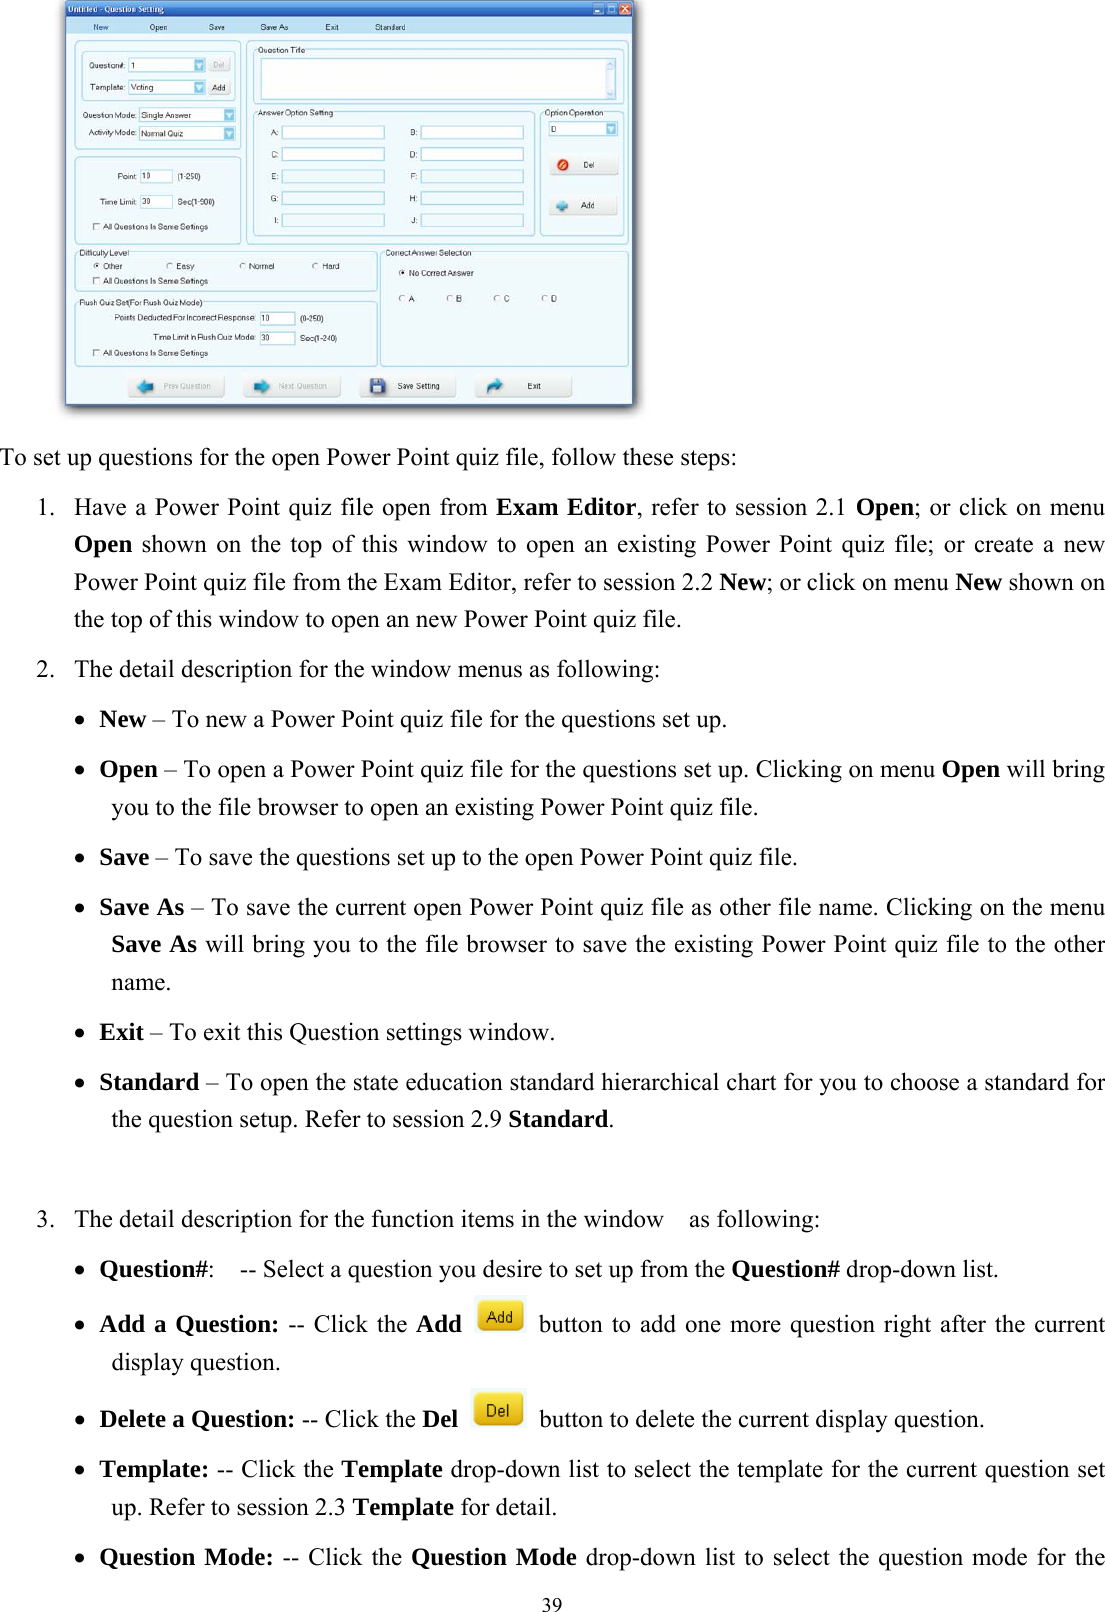  39   To set up questions for the open Power Point quiz file, follow these steps: 1.  Have a Power Point quiz file open from Exam Editor, refer to session 2.1 Open; or click on menu Open shown on the top of this window to open an existing Power Point quiz file; or create a new Power Point quiz file from the Exam Editor, refer to session 2.2 New; or click on menu New shown on the top of this window to open an new Power Point quiz file. 2.  The detail description for the window menus as following: •  New – To new a Power Point quiz file for the questions set up. •  Open – To open a Power Point quiz file for the questions set up. Clicking on menu Open will bring you to the file browser to open an existing Power Point quiz file. •  Save – To save the questions set up to the open Power Point quiz file. •  Save As – To save the current open Power Point quiz file as other file name. Clicking on the menu Save As will bring you to the file browser to save the existing Power Point quiz file to the other name. •  Exit – To exit this Question settings window. •  Standard – To open the state education standard hierarchical chart for you to choose a standard for the question setup. Refer to session 2.9 Standard.   3.  The detail description for the function items in the window    as following: •  Question#:    -- Select a question you desire to set up from the Question# drop-down list. •  Add a Question: -- Click the Add    button to add one more question right after the current display question. •  Delete a Question: -- Click the Del    button to delete the current display question. •  Template: -- Click the Template drop-down list to select the template for the current question set up. Refer to session 2.3 Template for detail. •  Question Mode: -- Click the Question Mode drop-down list to select the question mode for the 